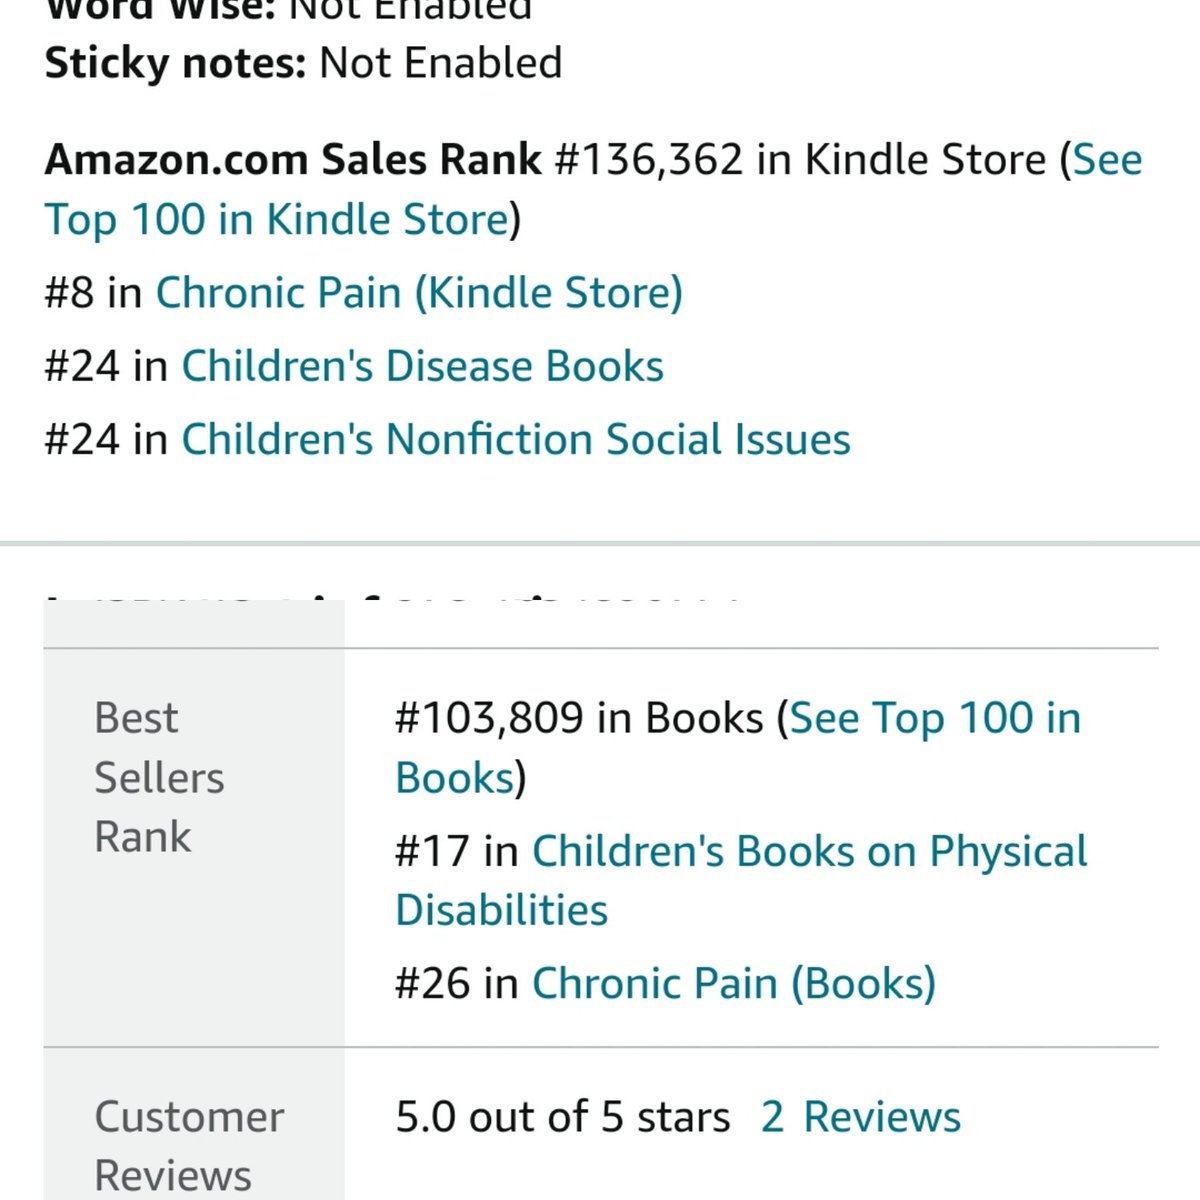 Bendy Bones and Stretchy Skin has officially hit bestseller status in ALL its categories, including chronic pain and nonfiction social issues!  #ehlersdanlos #ChronicPain #disability #BookTwitter @LaraBloom @TheEDSociety